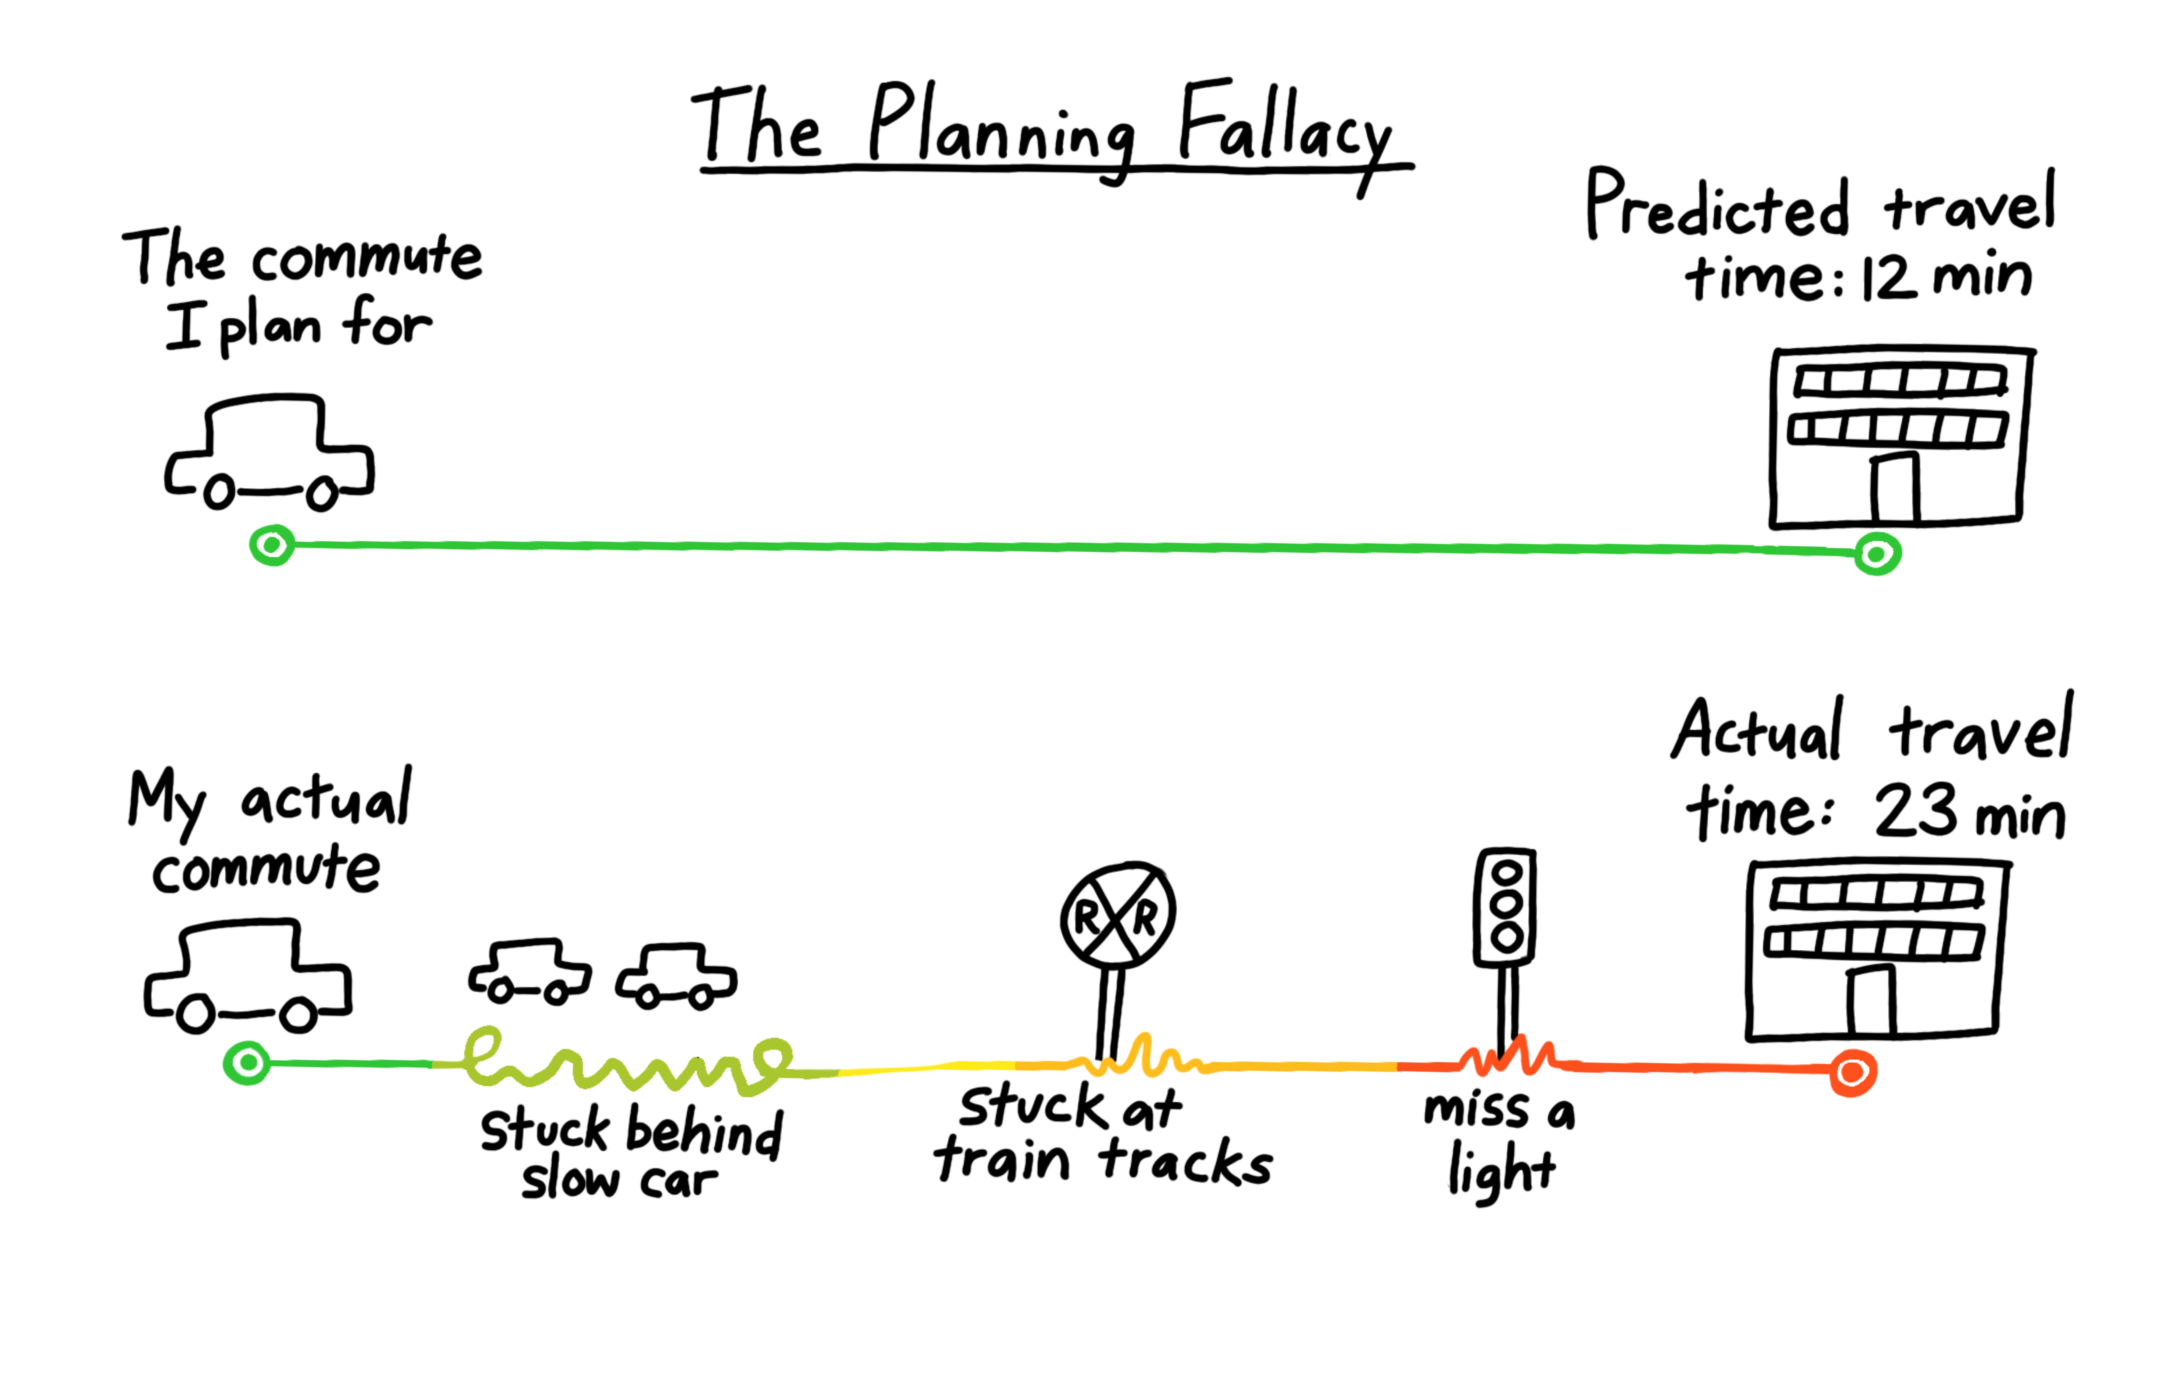 essay on planning fallacy